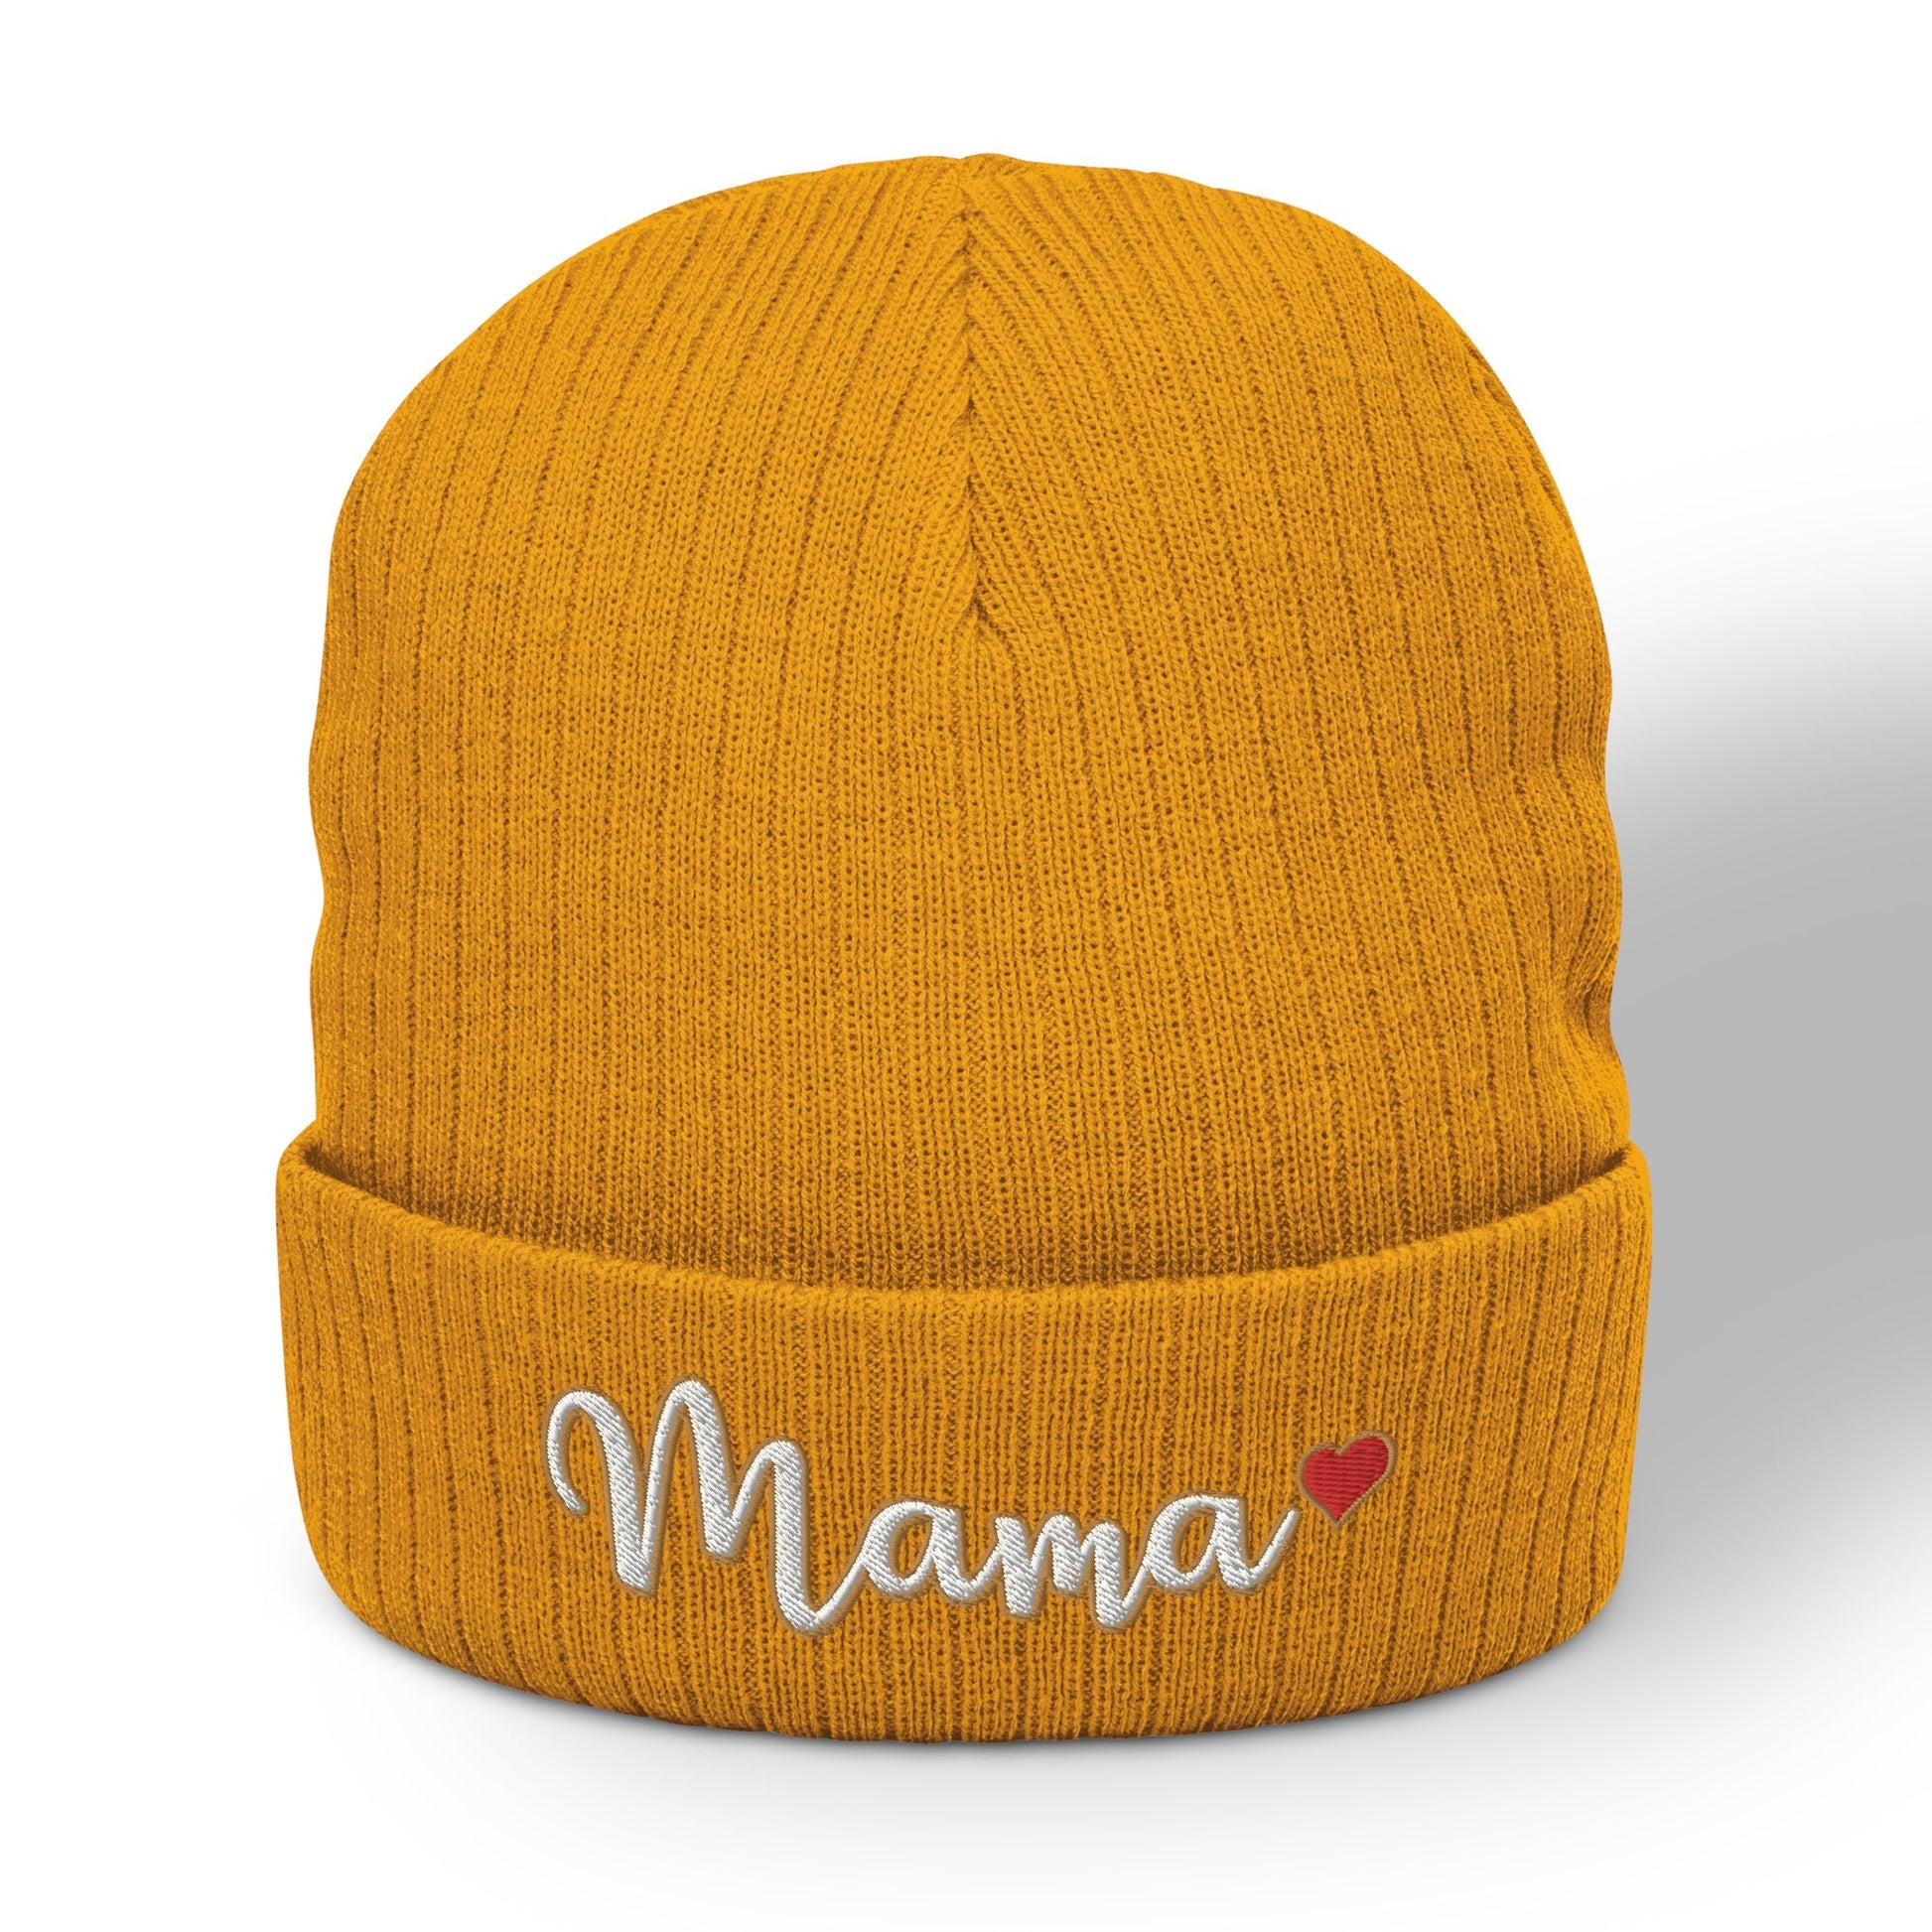  Mama Embroidered Ribbed Knit Beanie with Heart Winter Hat ArcZeal Designs